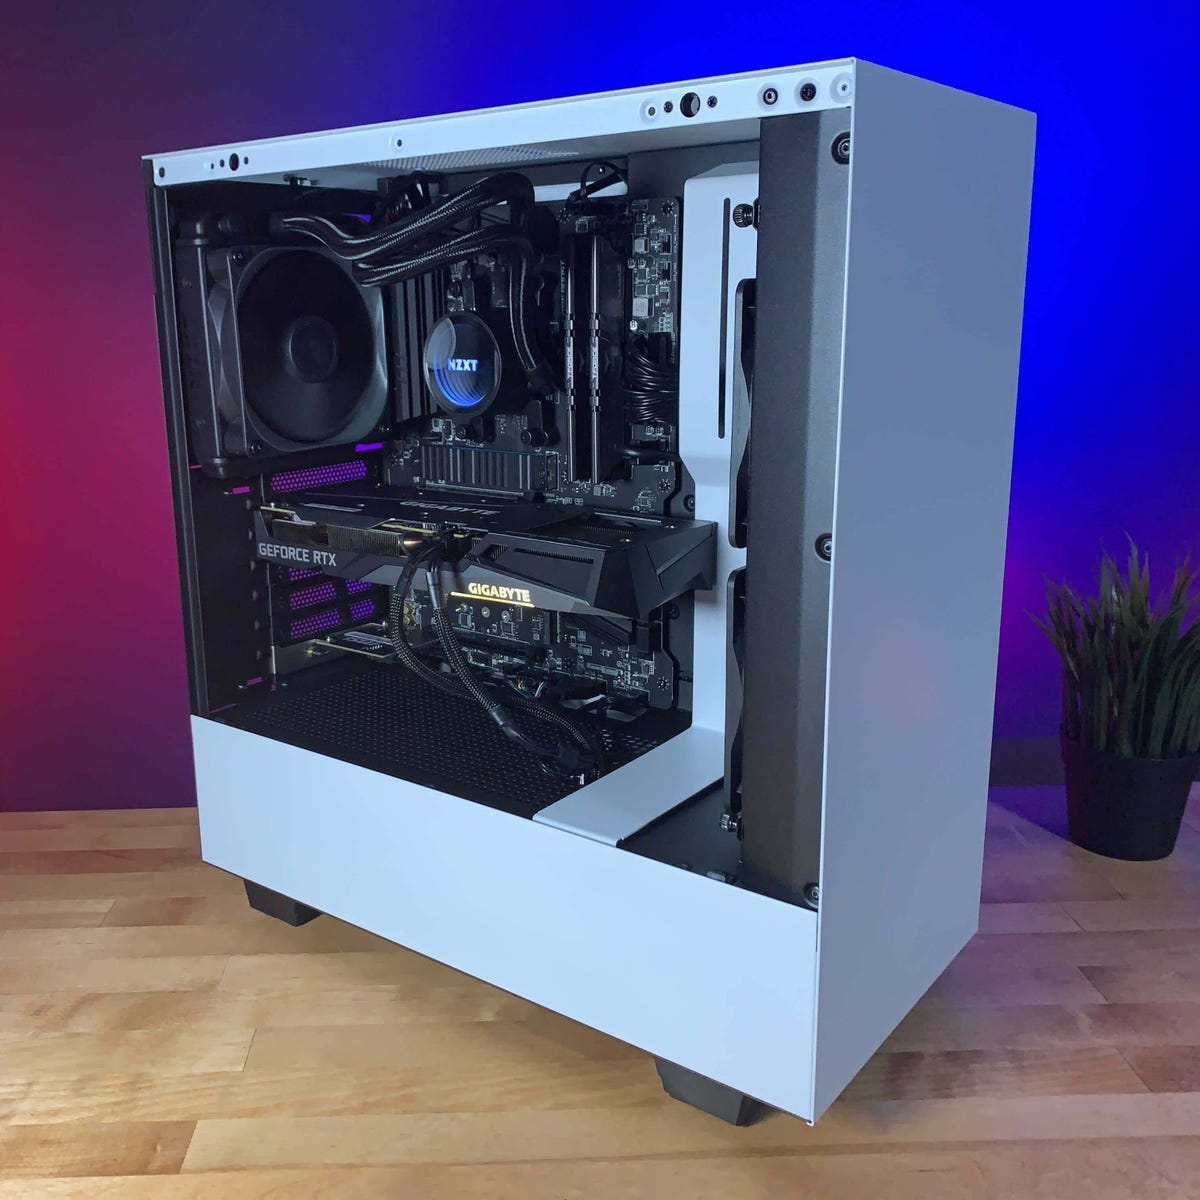 fremtid Hula hop Monograph NZXT BLD Kit review: Building a gaming PC doesn't get easier than this -  CNET